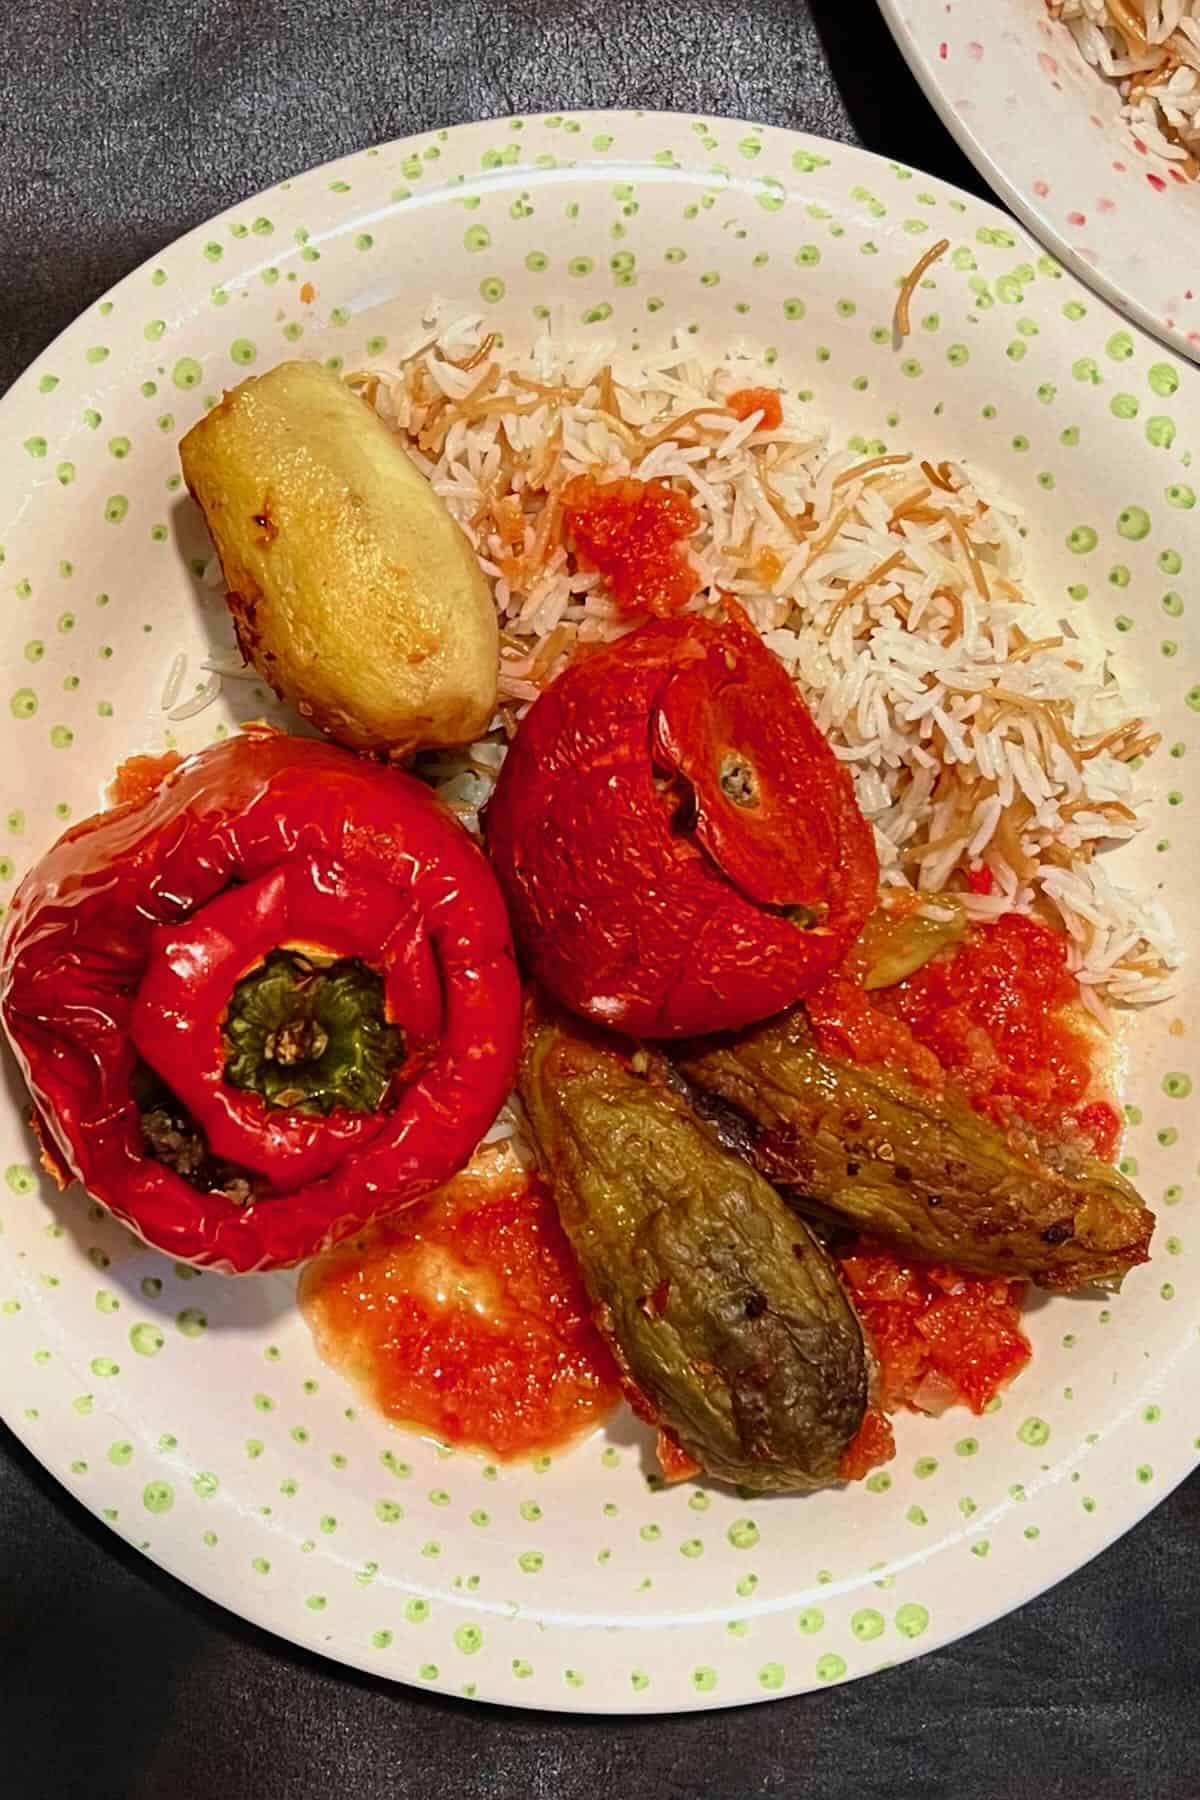 A serving of stuffed veggies with meat and rice